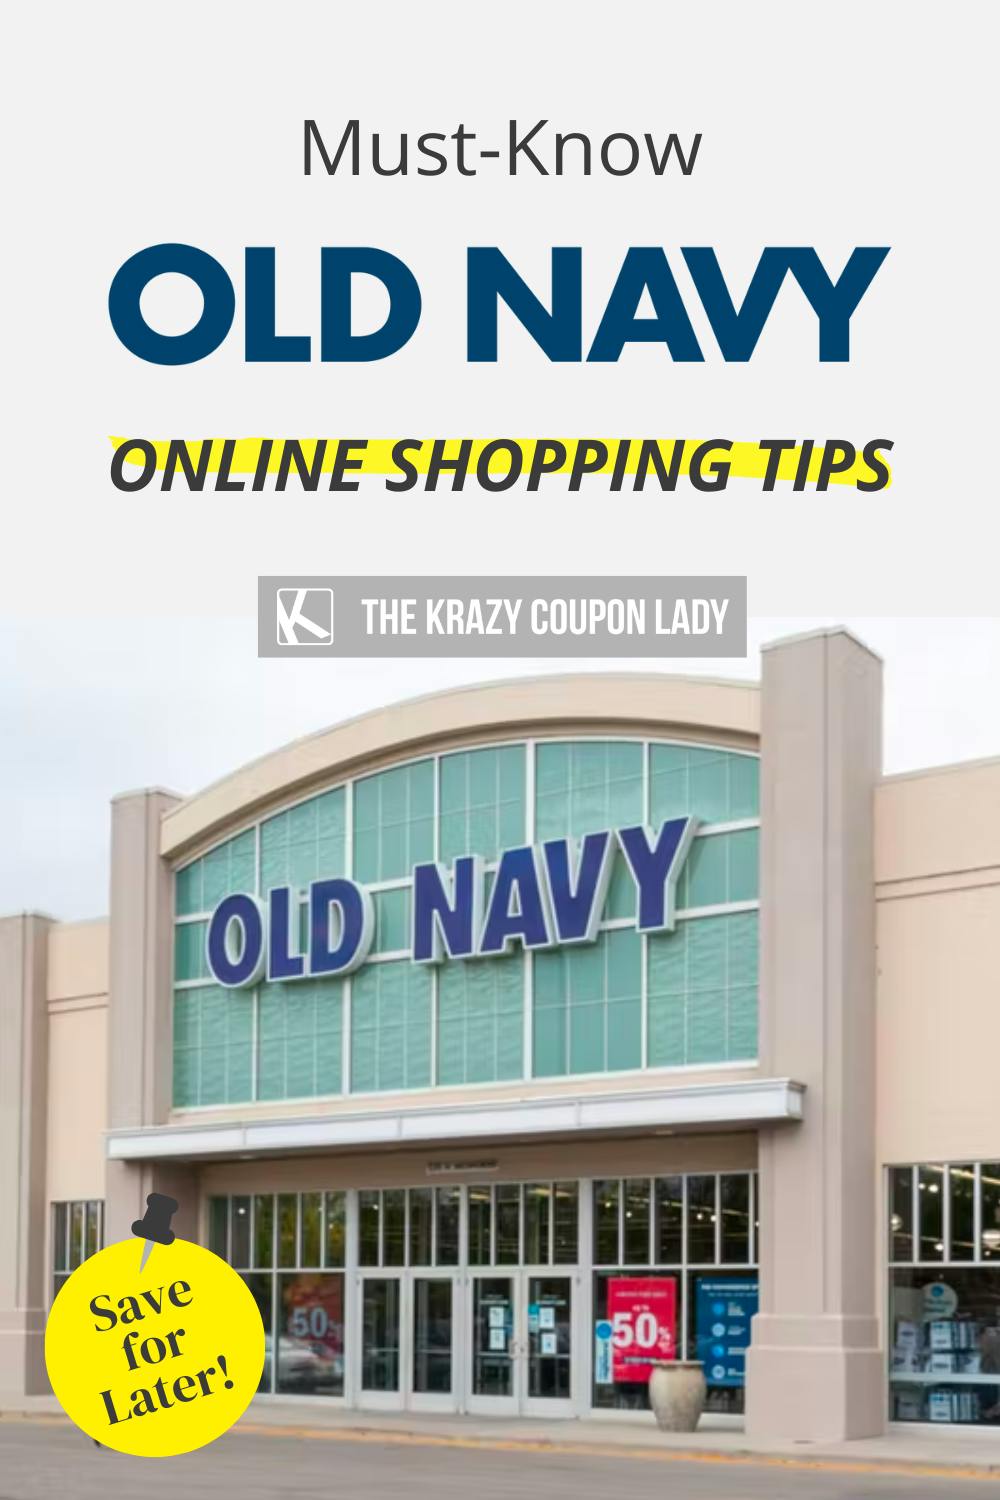 22 Old Navy Online Shopping Tips